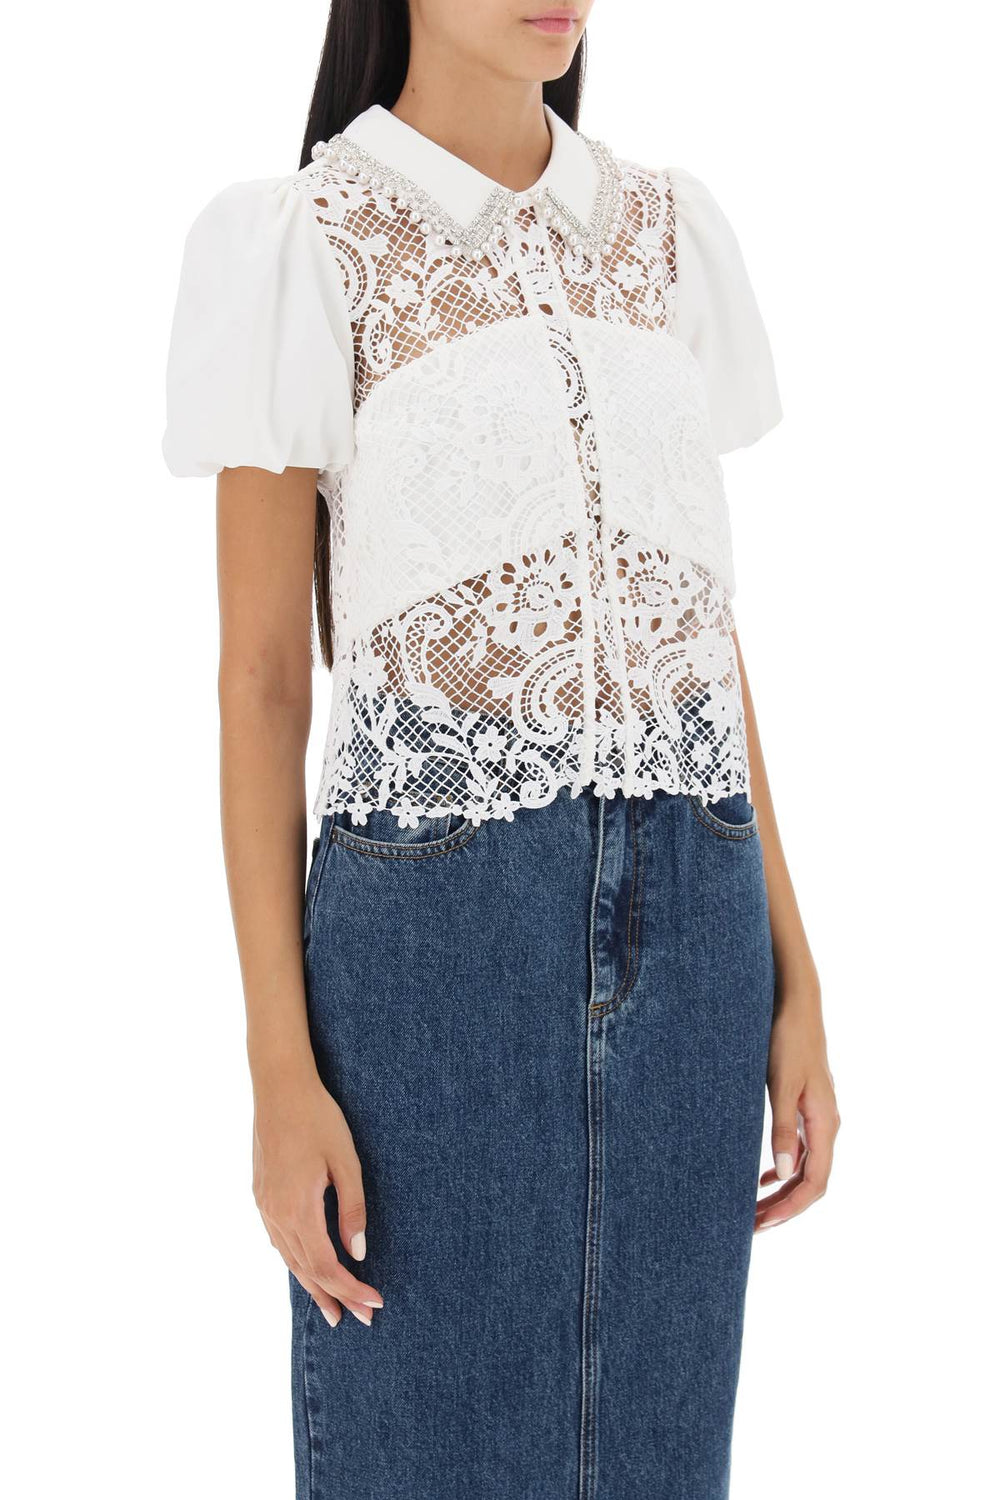 floral-lace top with appliques-1